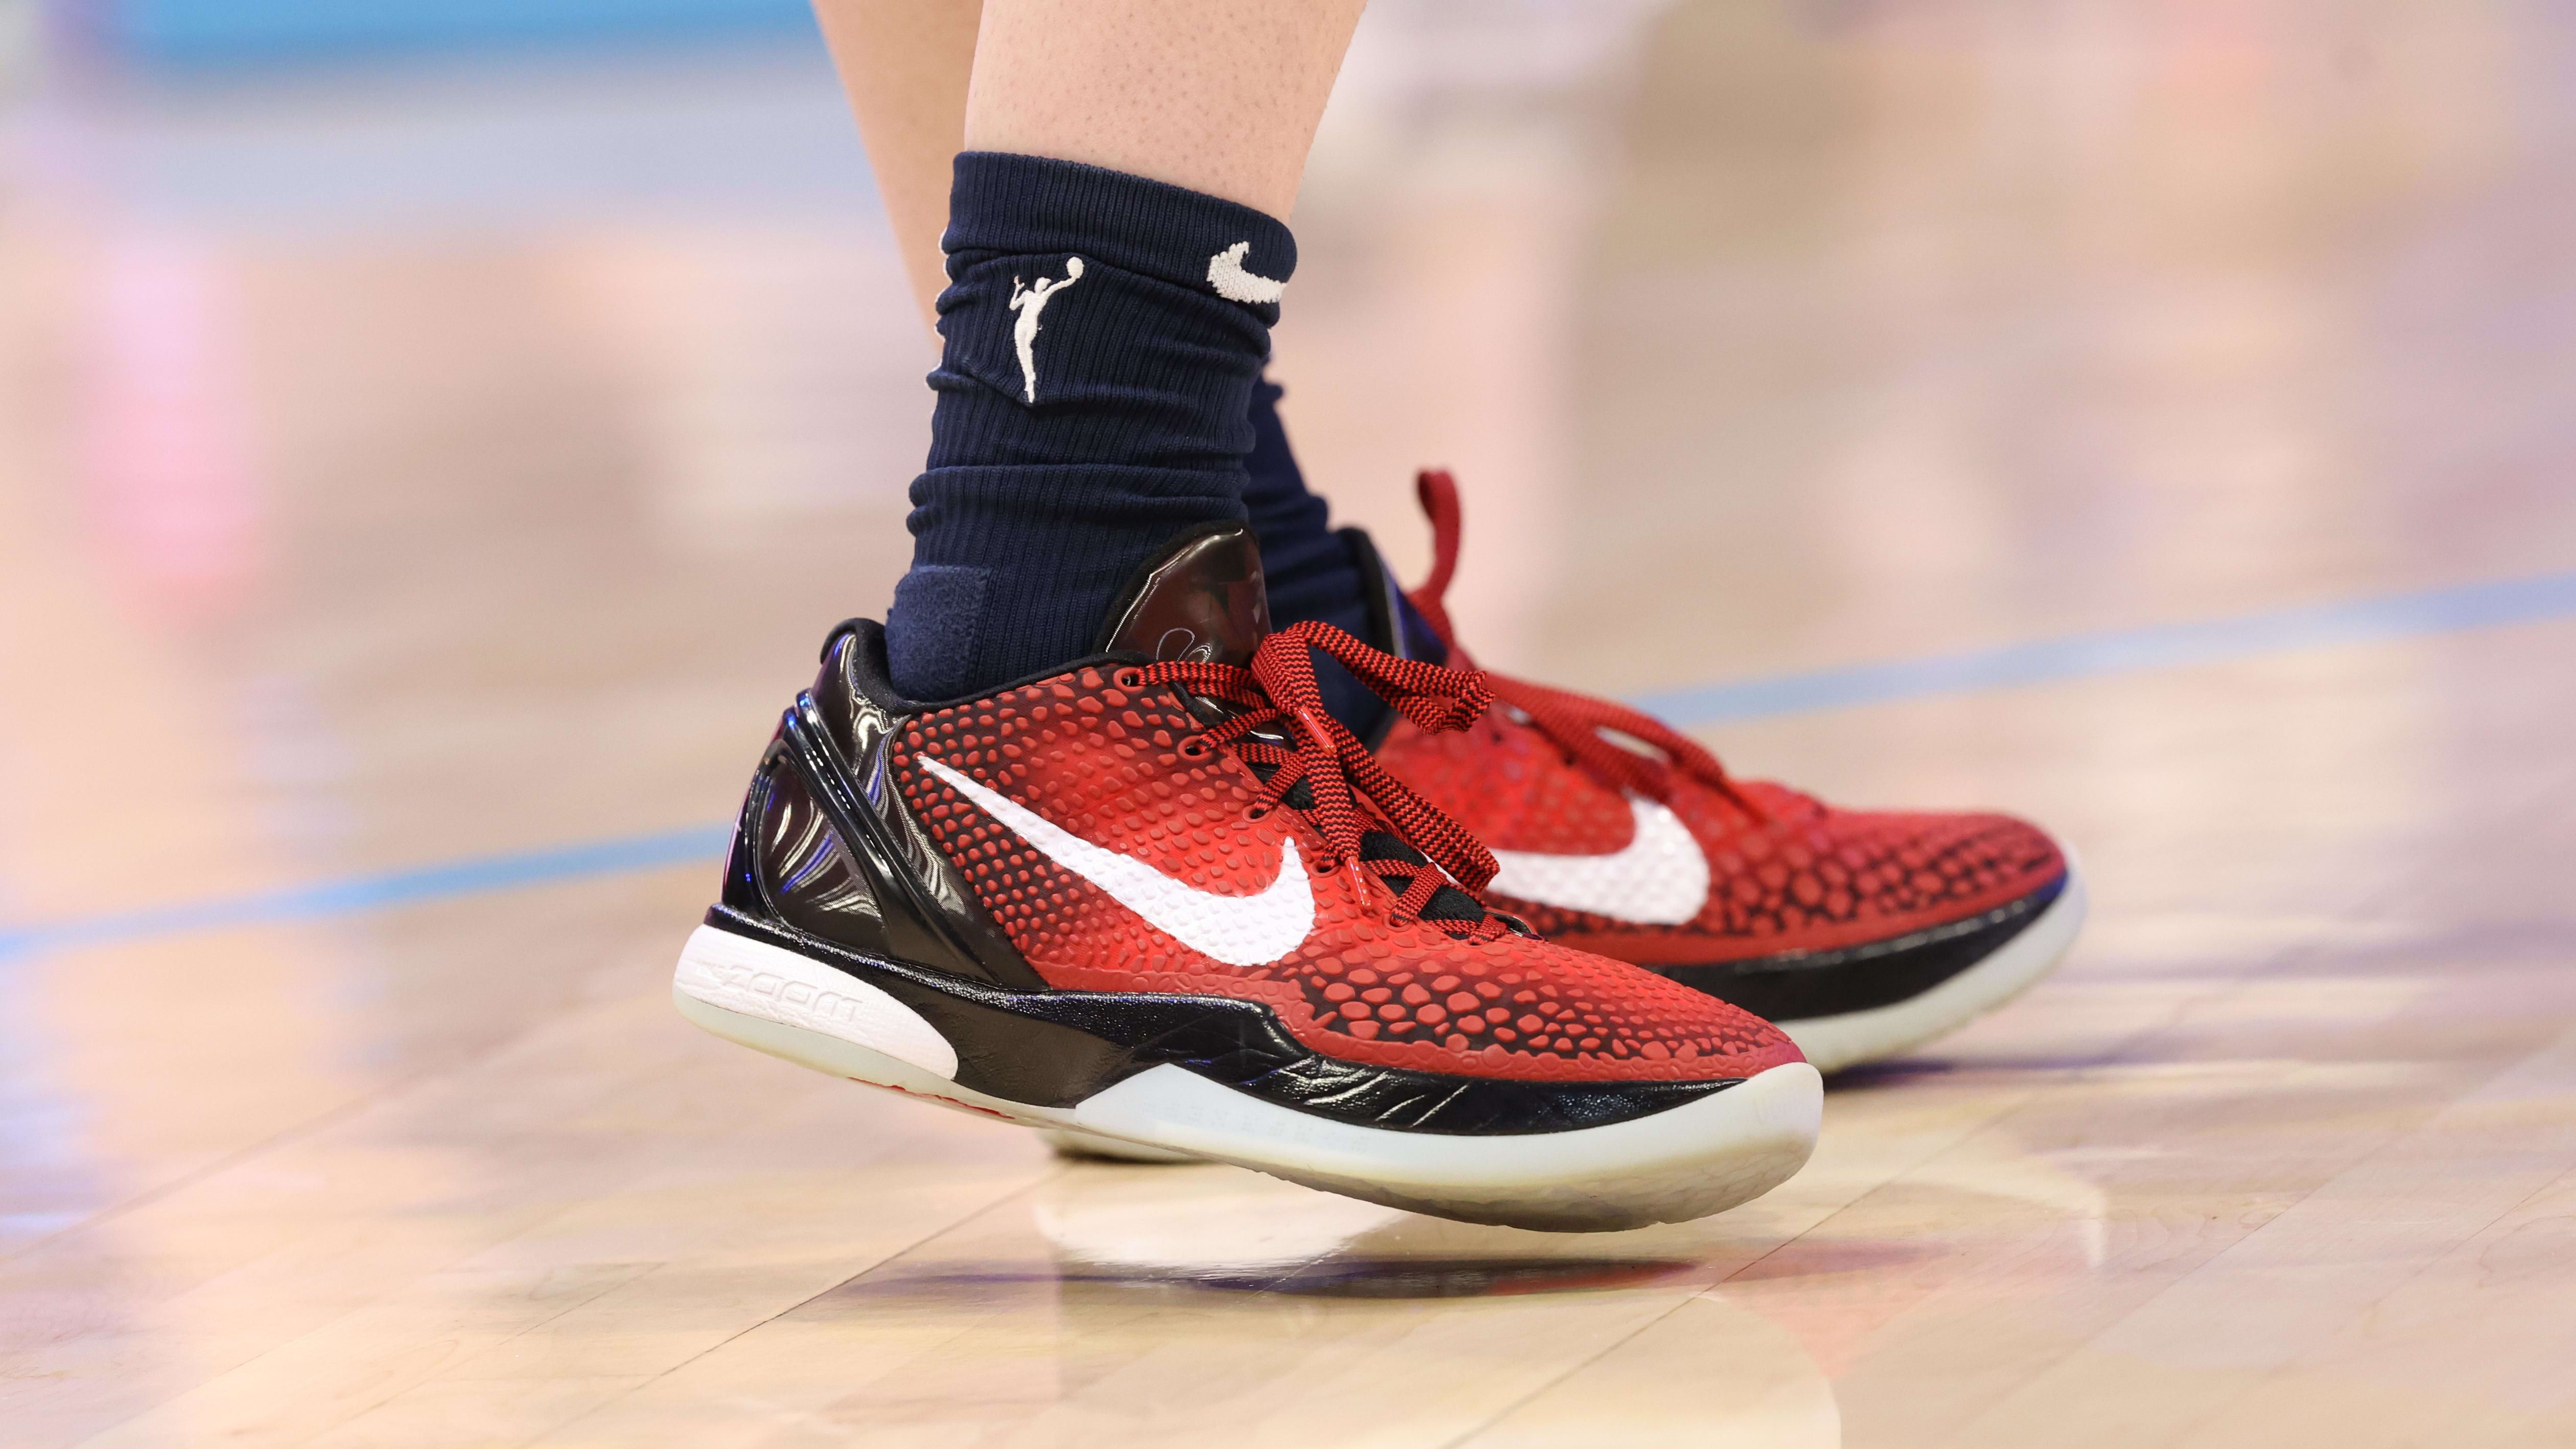 Indiana Fever guard Caitlin Clark's red and black Nike sneakers.